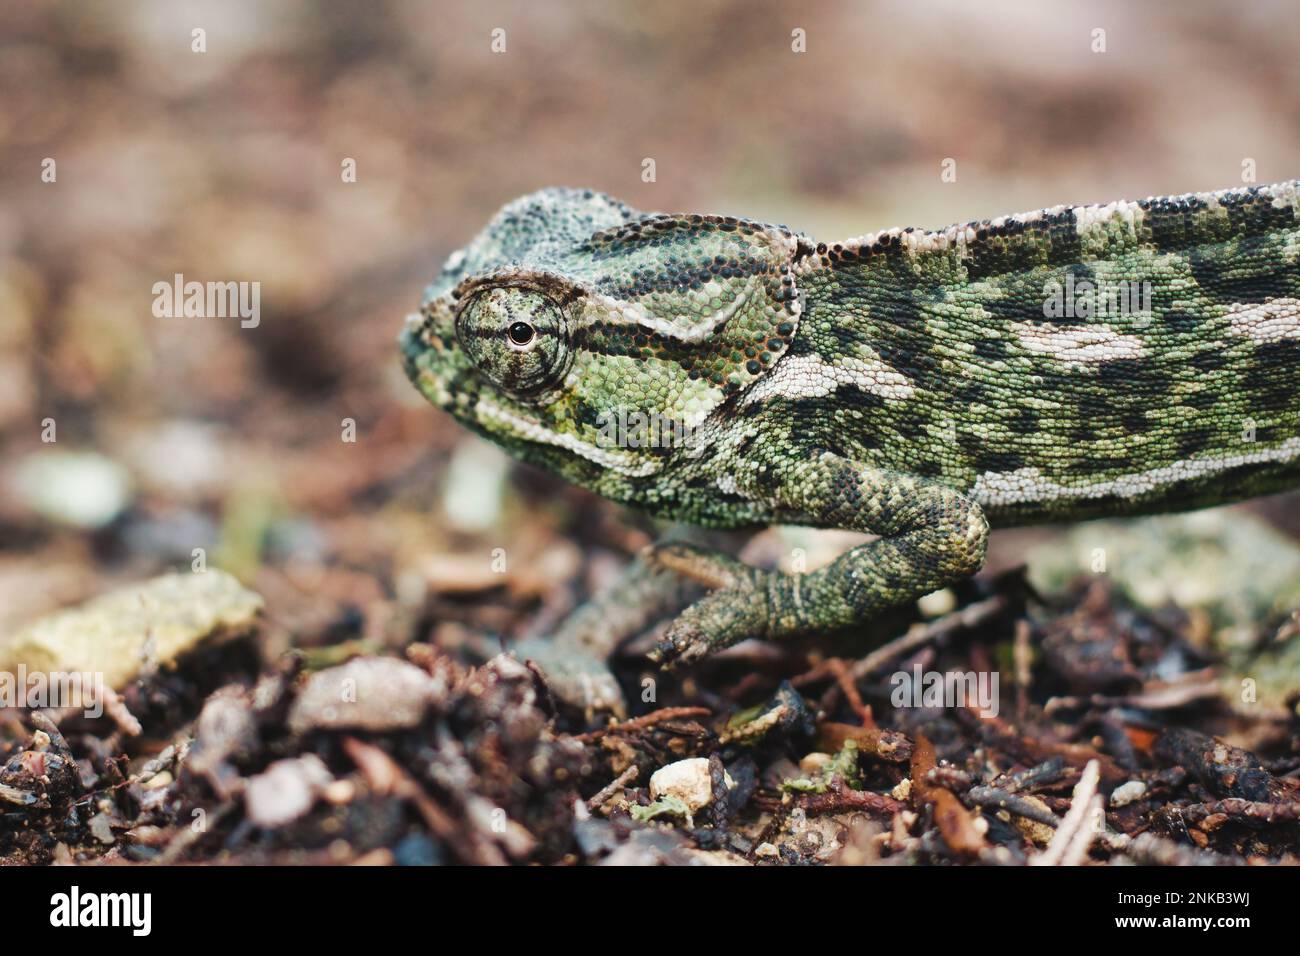 Close-up animal portrait shot of a Mediterranean chameleon crawling on the forest floor Stock Photo